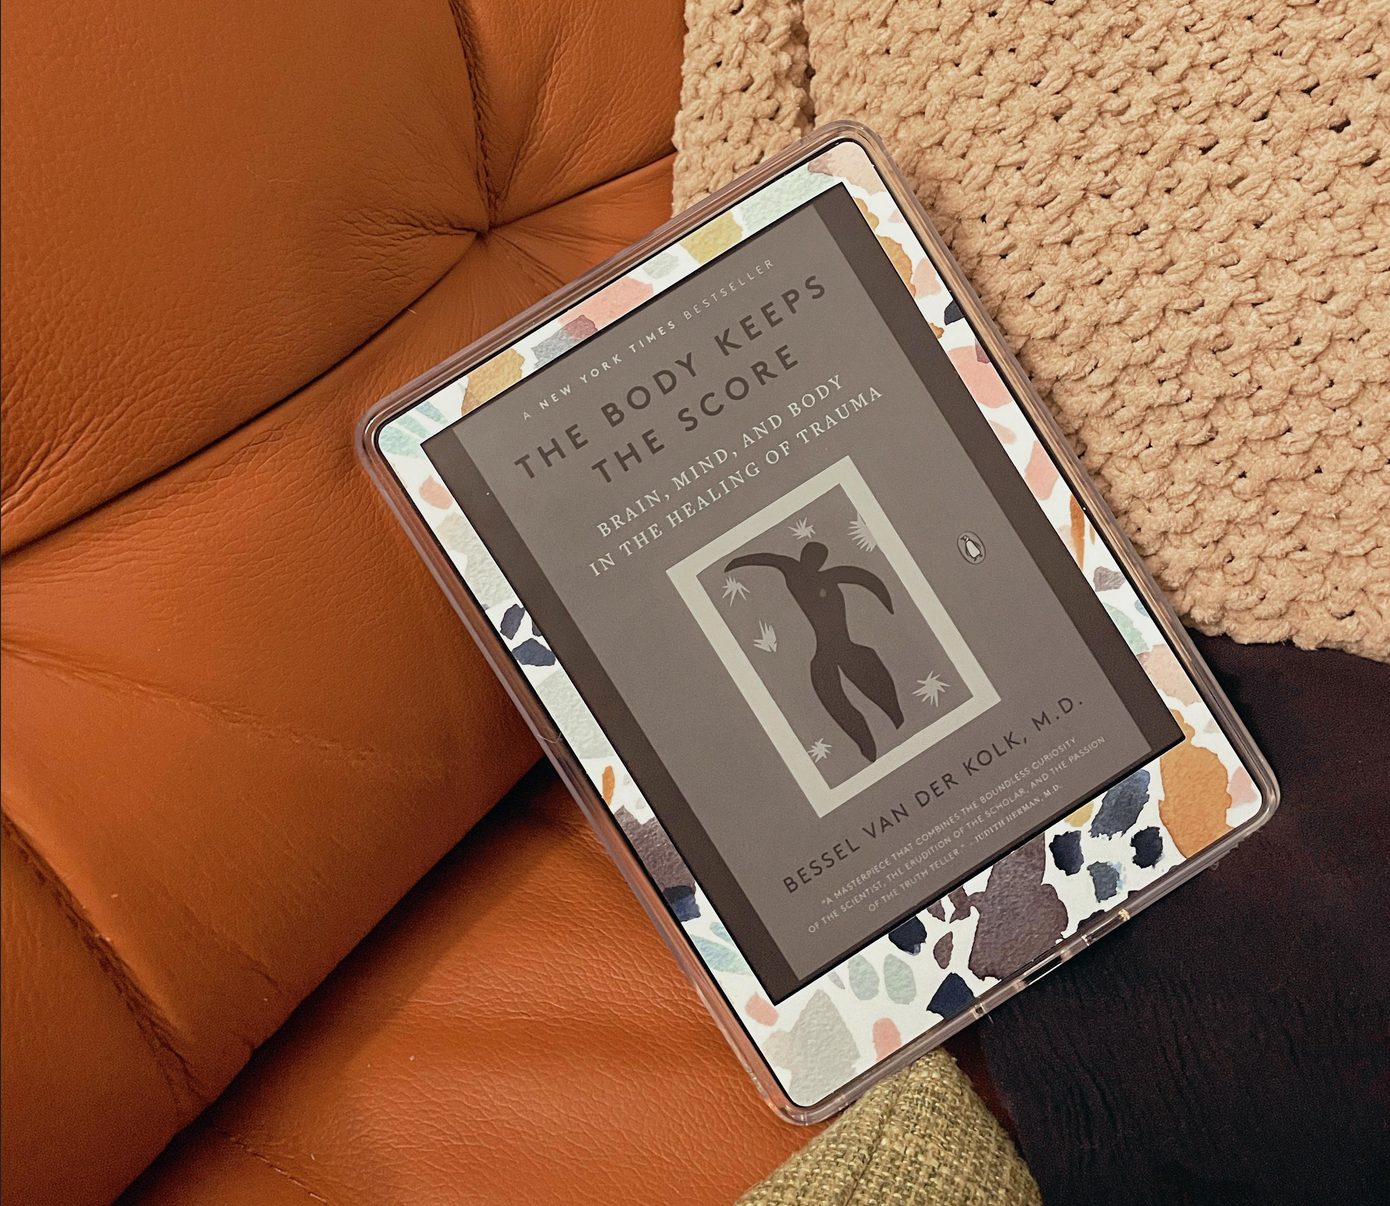 New Kindle Paperwhite (2022): what we want to see